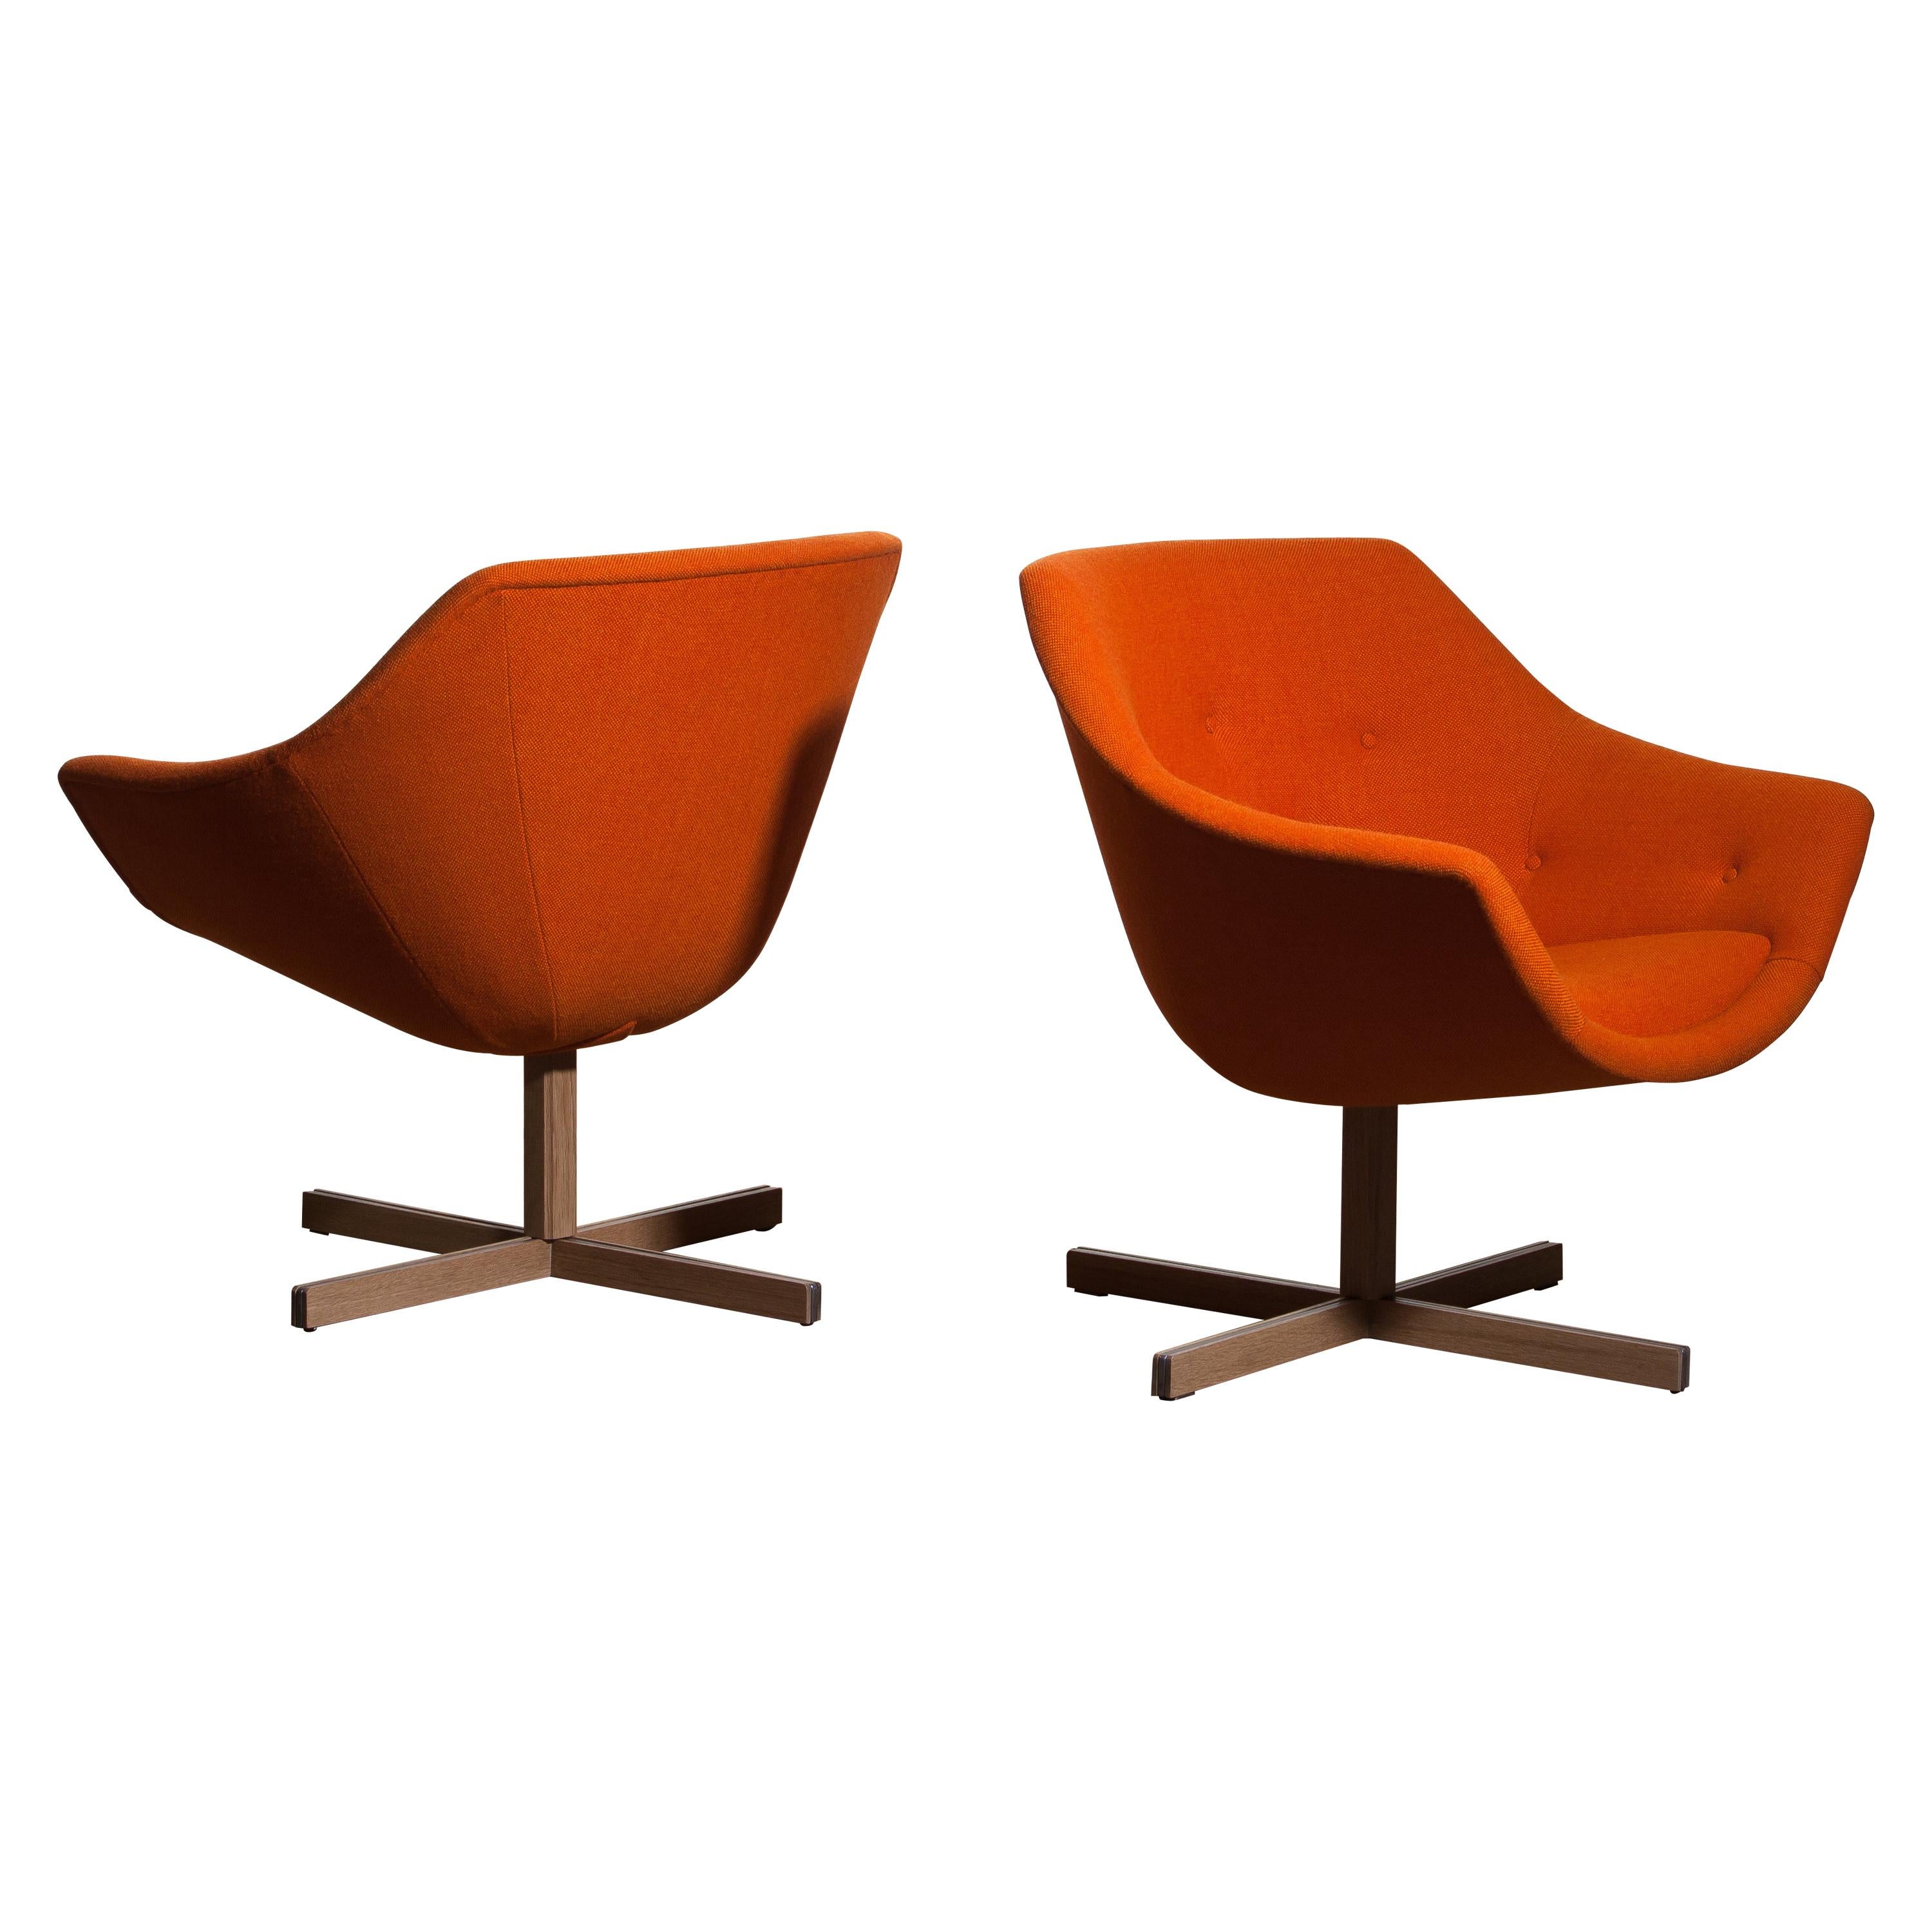 Fantastic pair of 'Mandarini' swivel armchairs made by Carl Gustaf Hiort for Puunveisto Oy - Wood work Ltd.
These chairs are upholstered with a buttoned orange fabric 'Hallingdal' by Kvadrat designed by Nanna Ditzel, on a oak swivel base.
They are